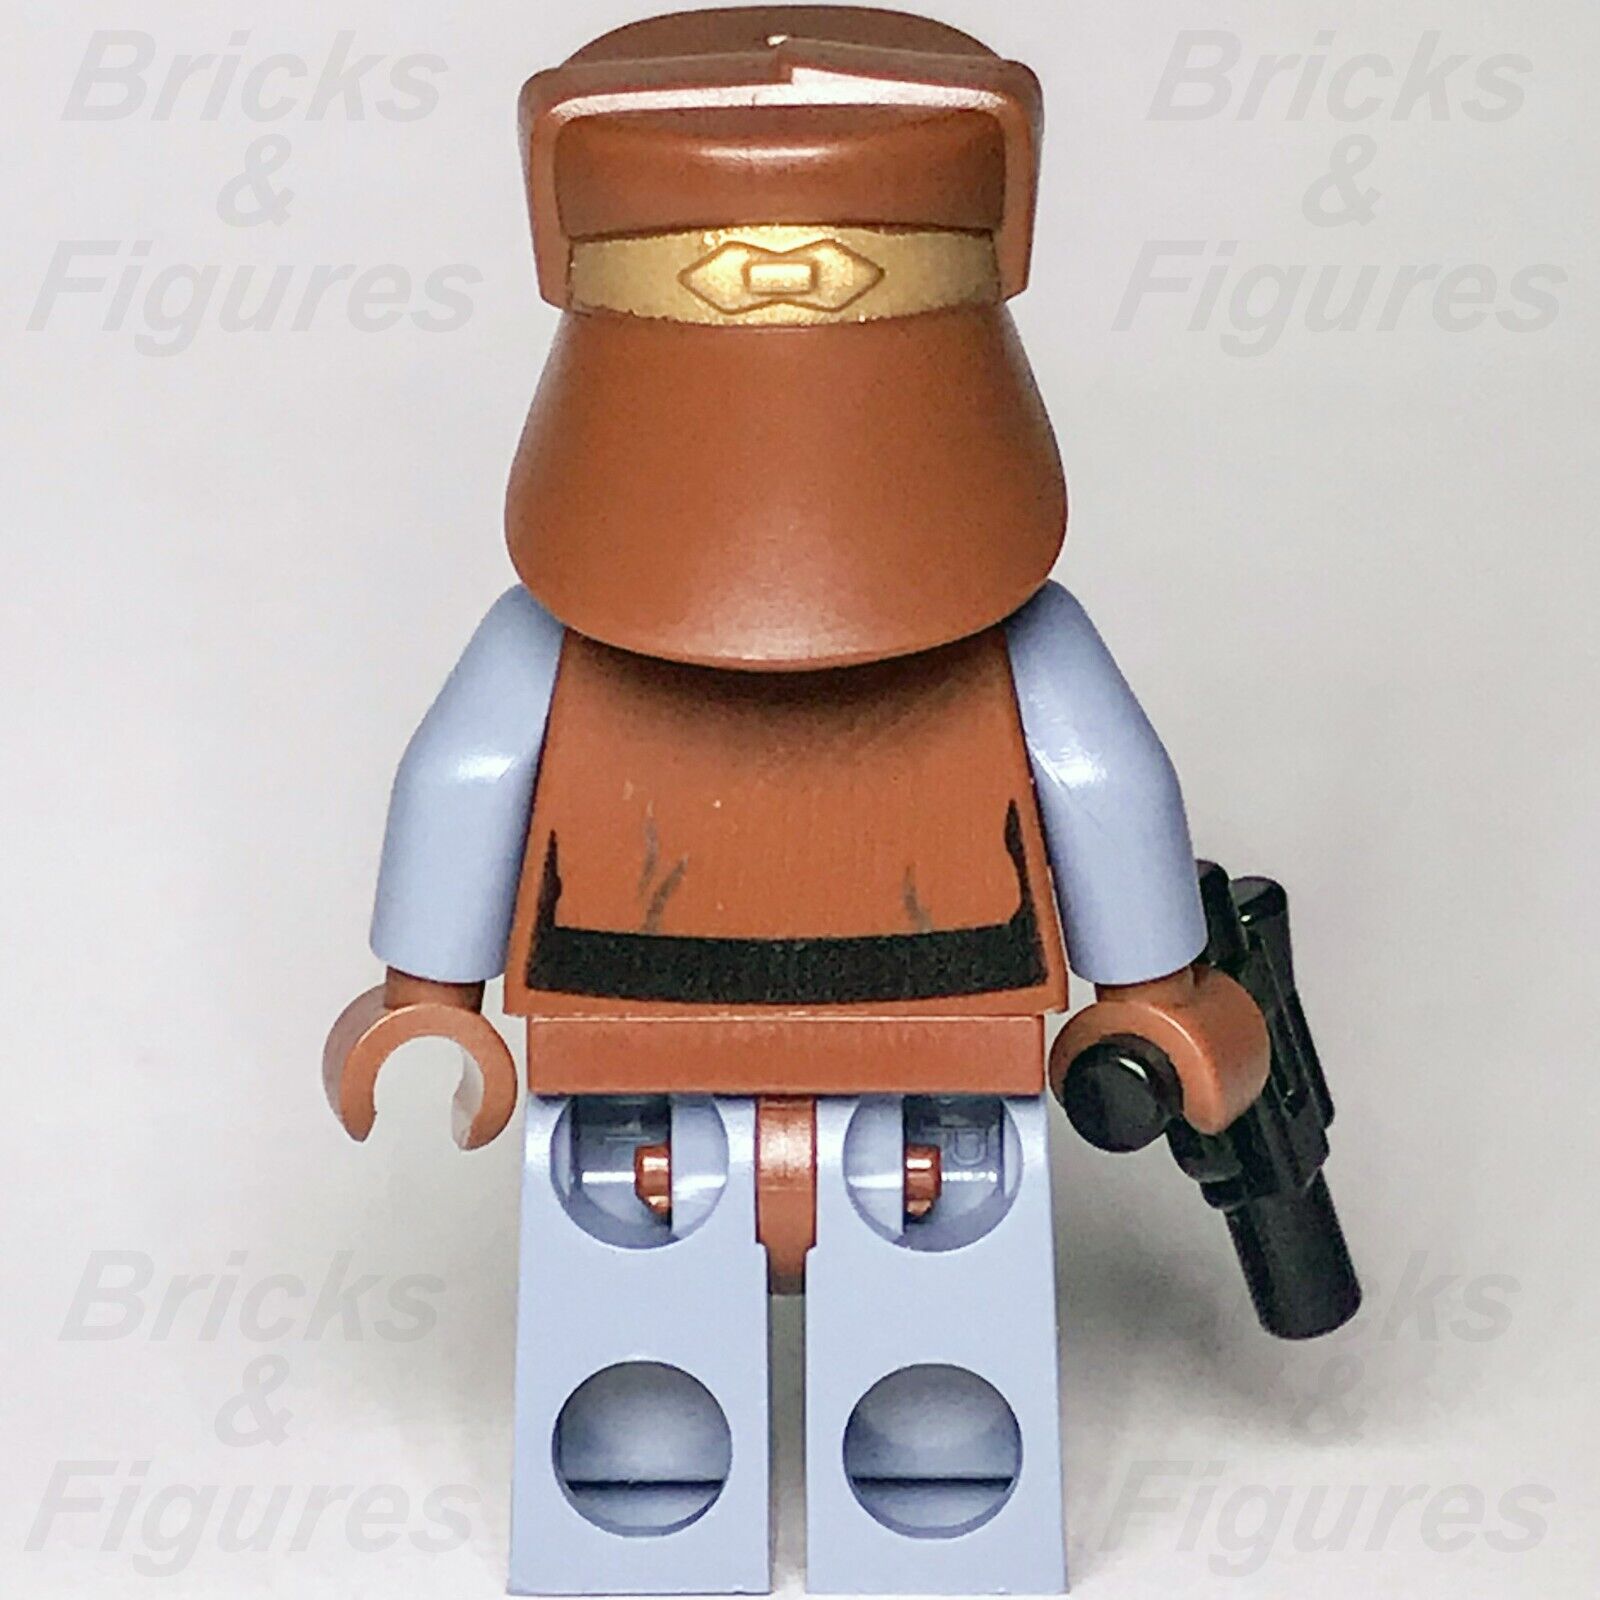 LEGO Star Wars Naboo Security Officer Minifigure Episode 1 75091 sw0638 Minifig